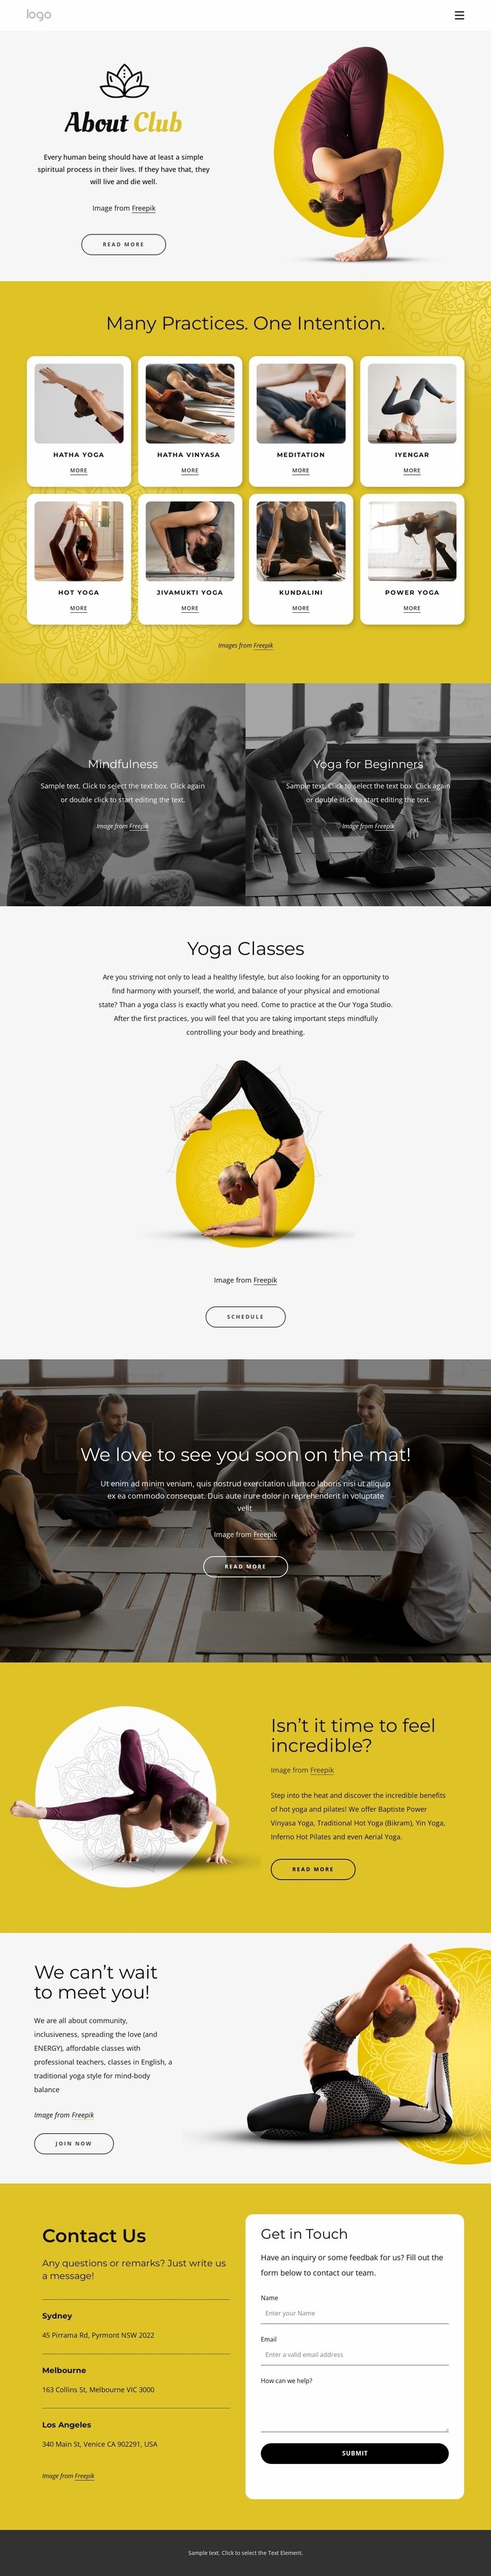 Physical, ethical and spiritual practice Webflow Template Alternative